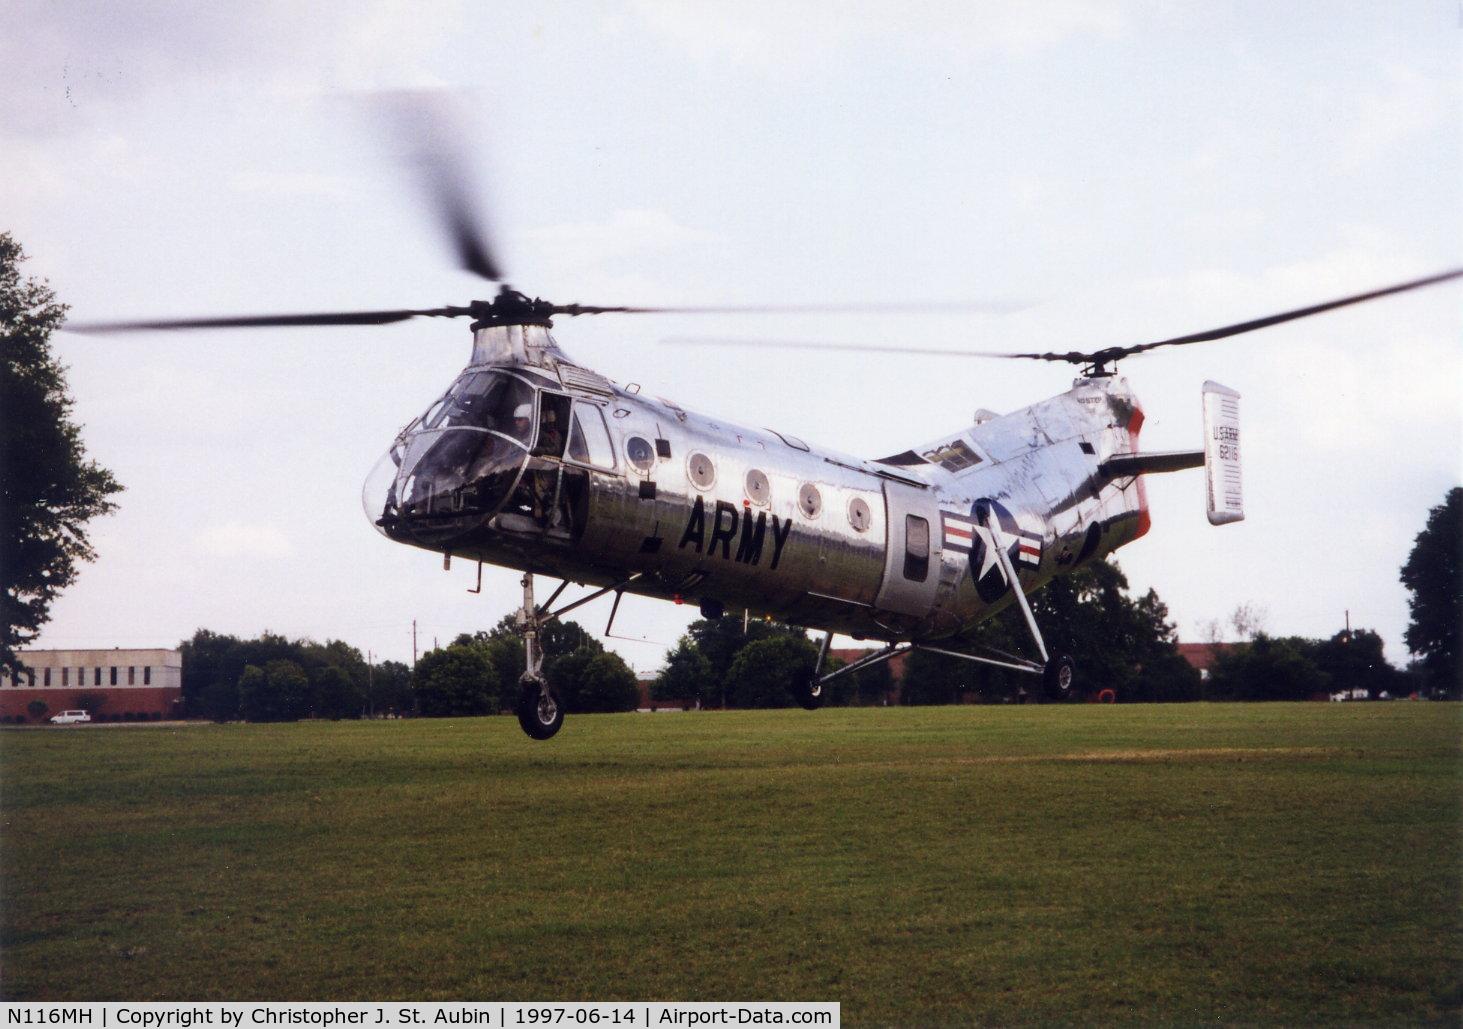 N116MH, 1956 Vertol CH-21C Shawnee C/N C.278, CH-21C 56-2116 N116MH hovers over the parade field at Rt. Rucker, AL.  Acft flown from Springdale, AR to Ft. Rucker for 1997 Army Warrant Officer Convention.